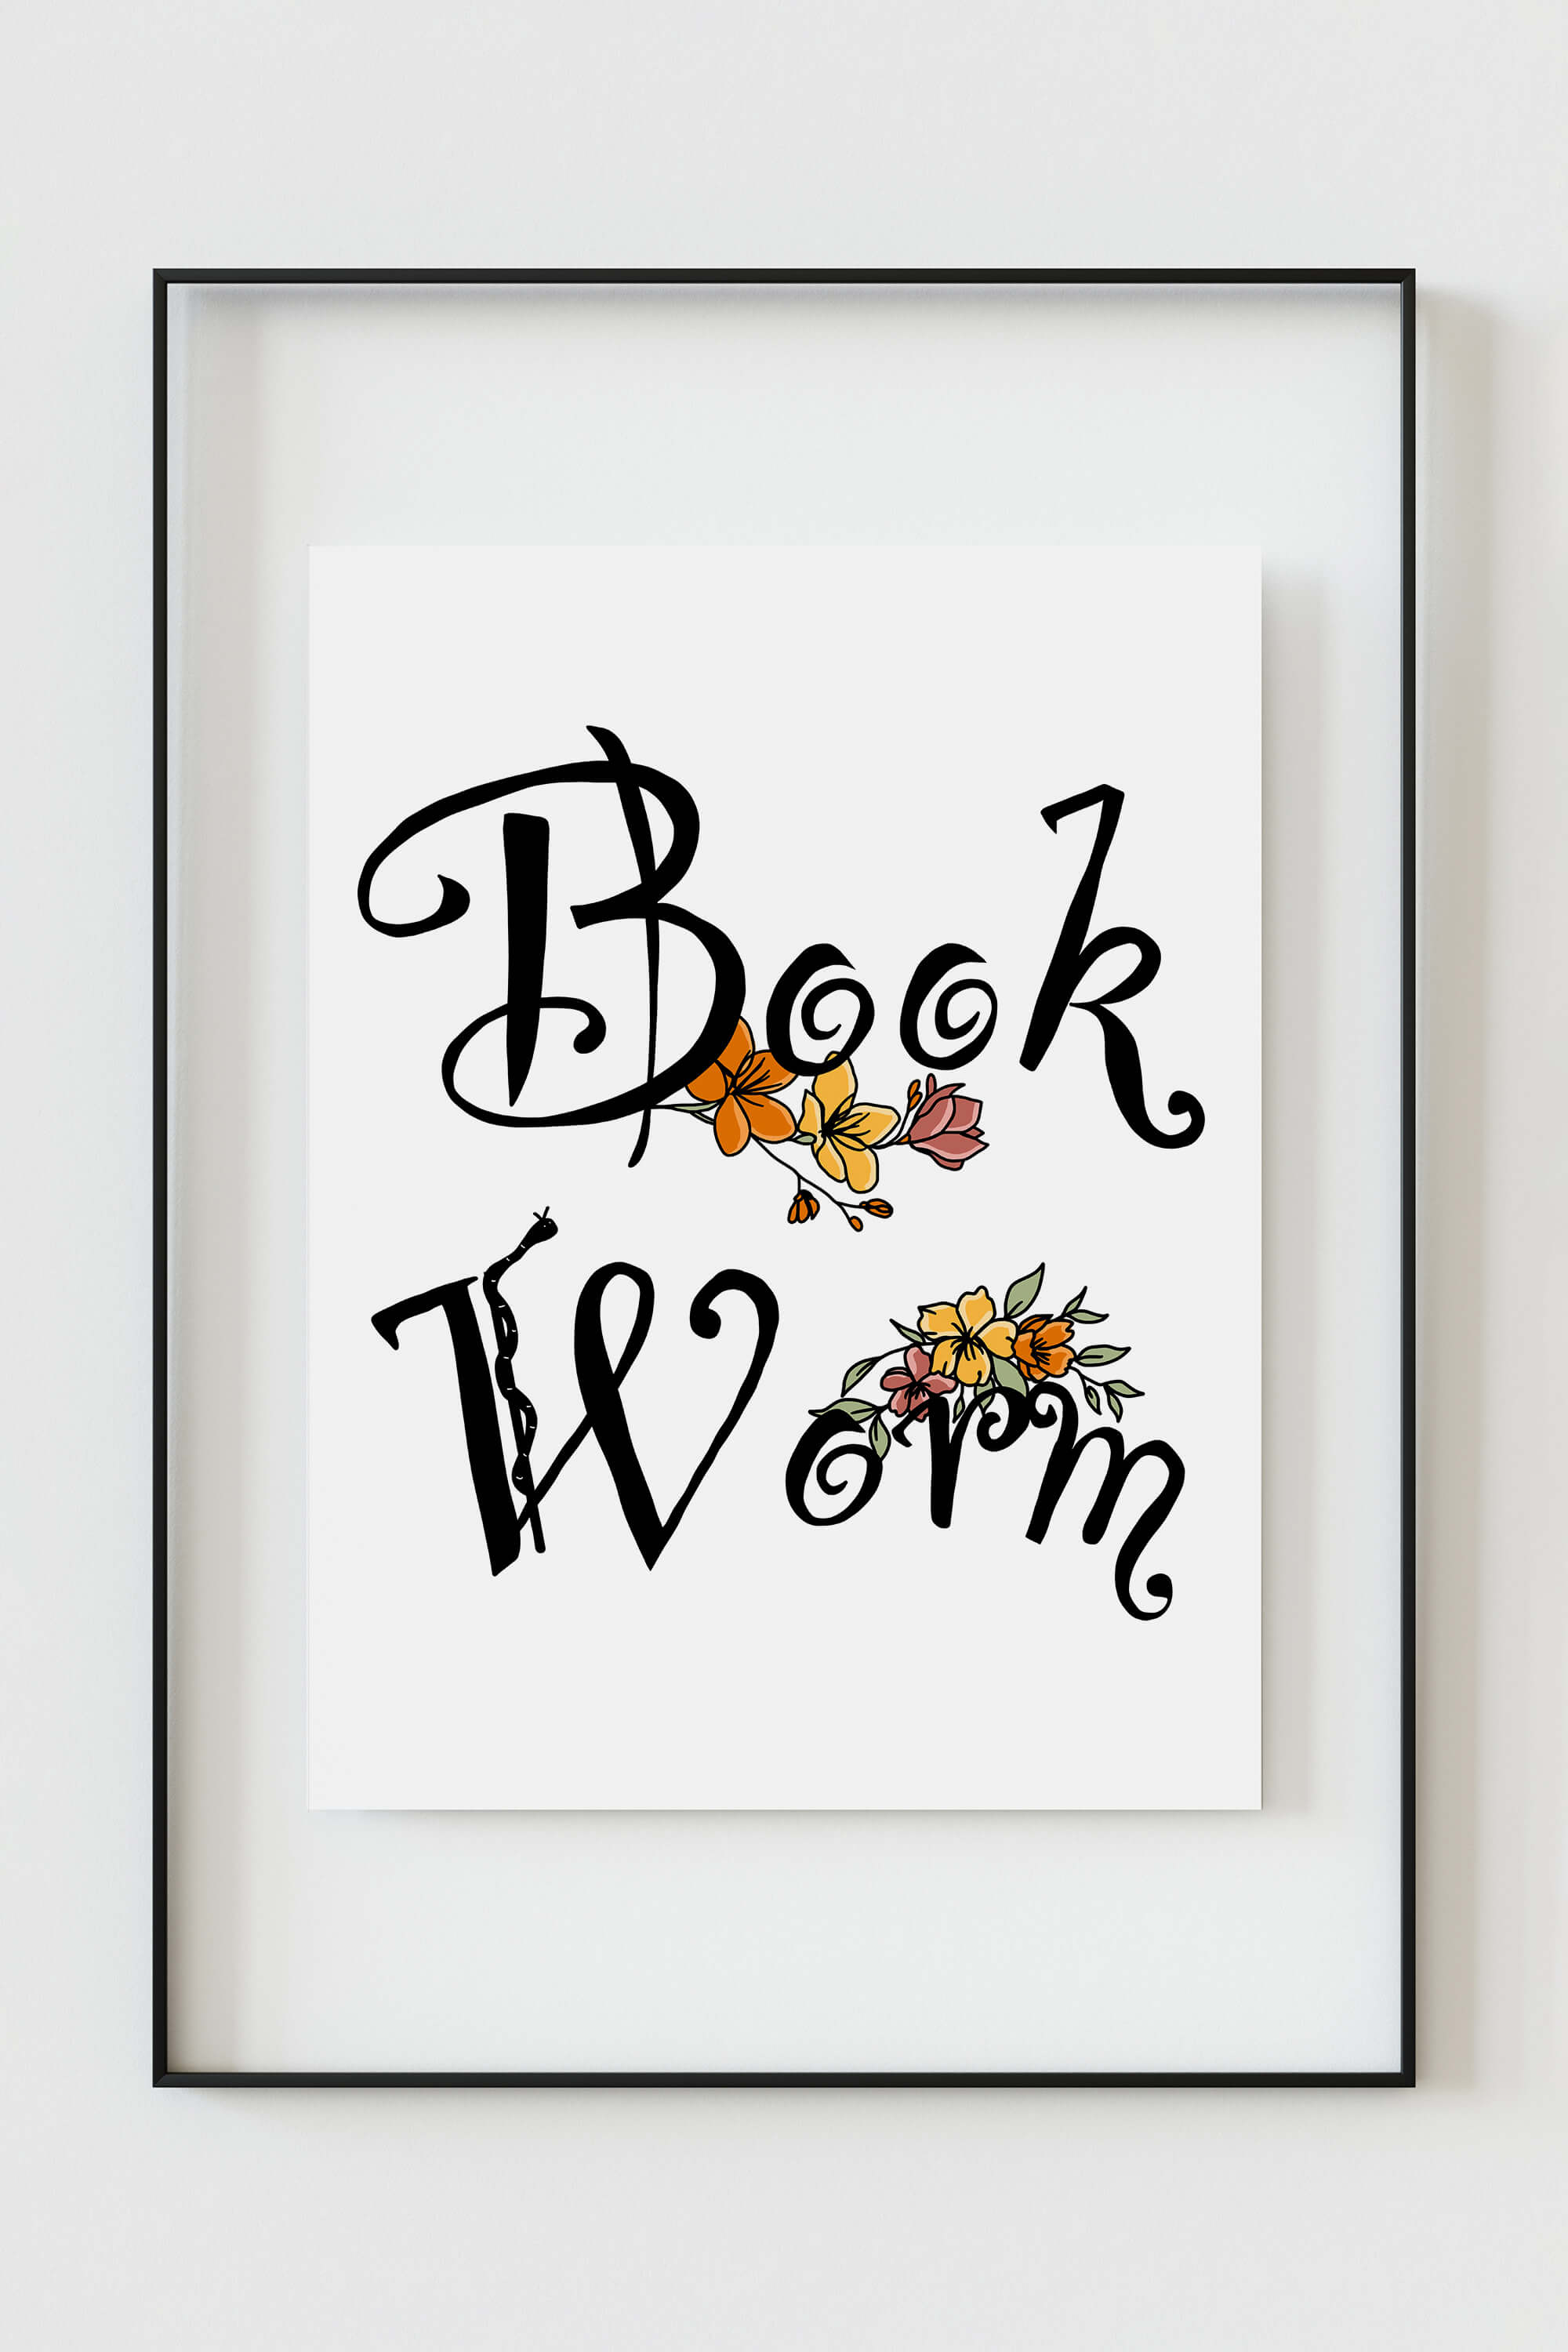 A stunning literary delight art poster, perfect for book lovers. Eloquent words and botanical line art adorn the print, creating an elegant blend of sophistication and whimsy. Elevate your space with this unique book lover gift, celebrating the charm of well-chosen words and the magic of literature.